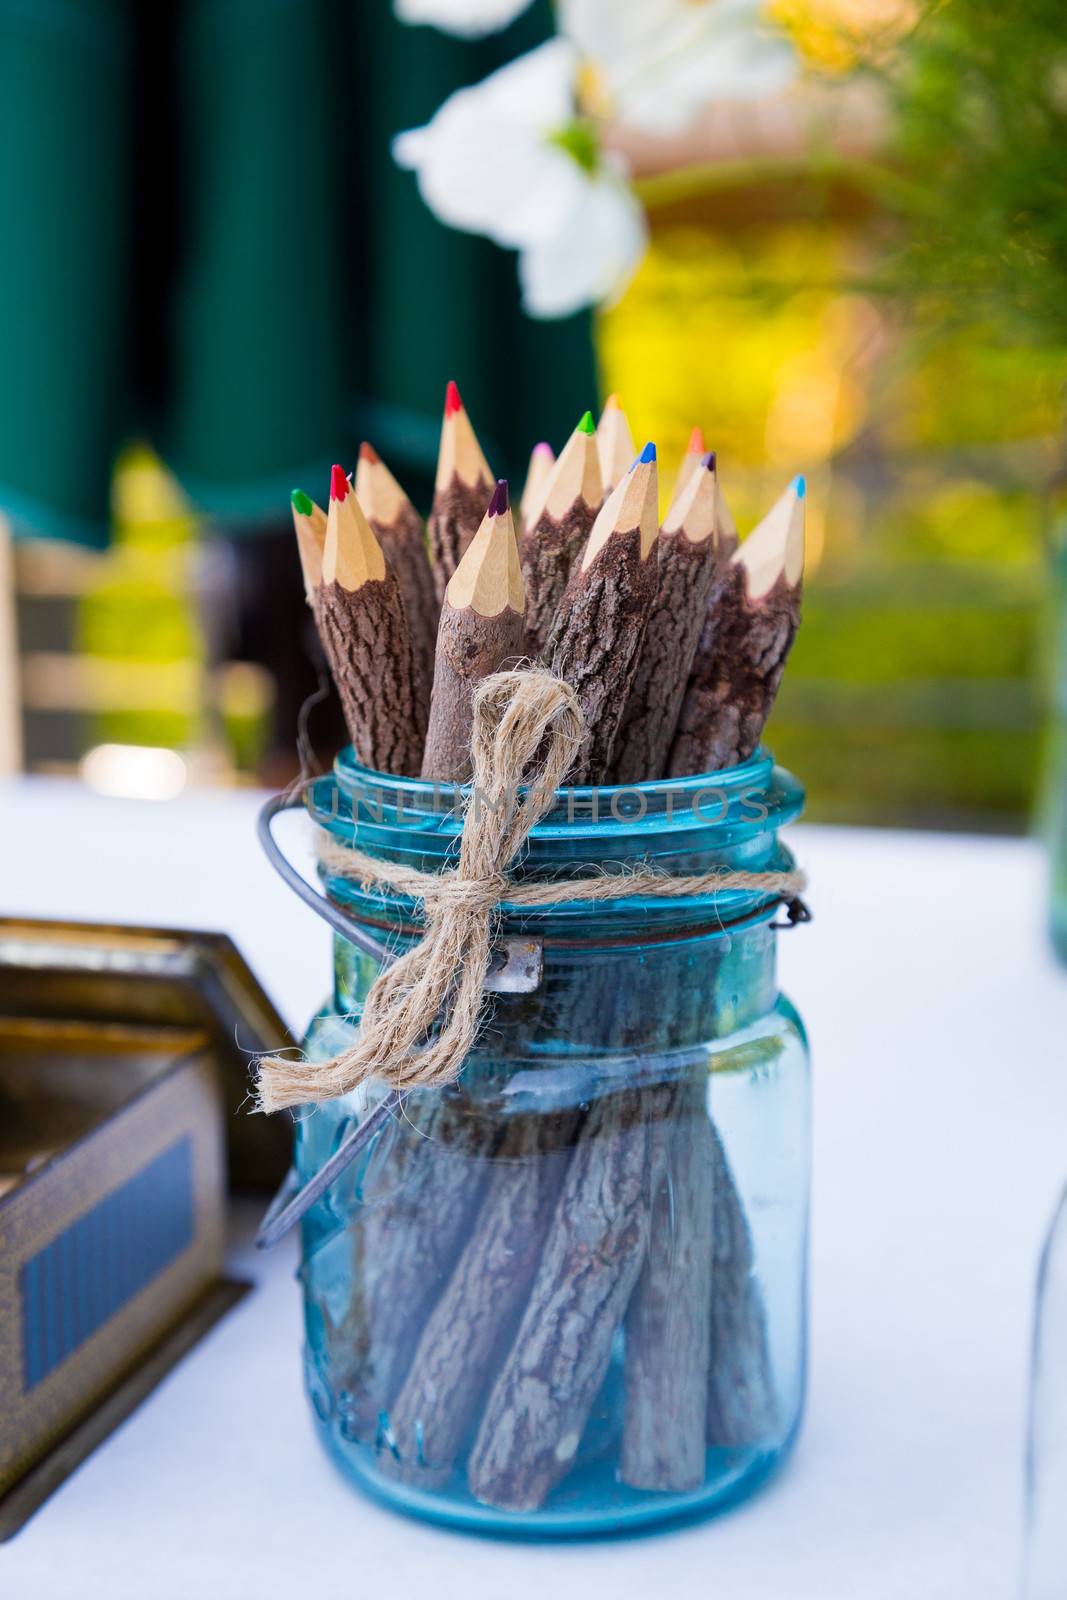 These color pencils are in a blue jar at a wedding for the guests to use to write or draw.